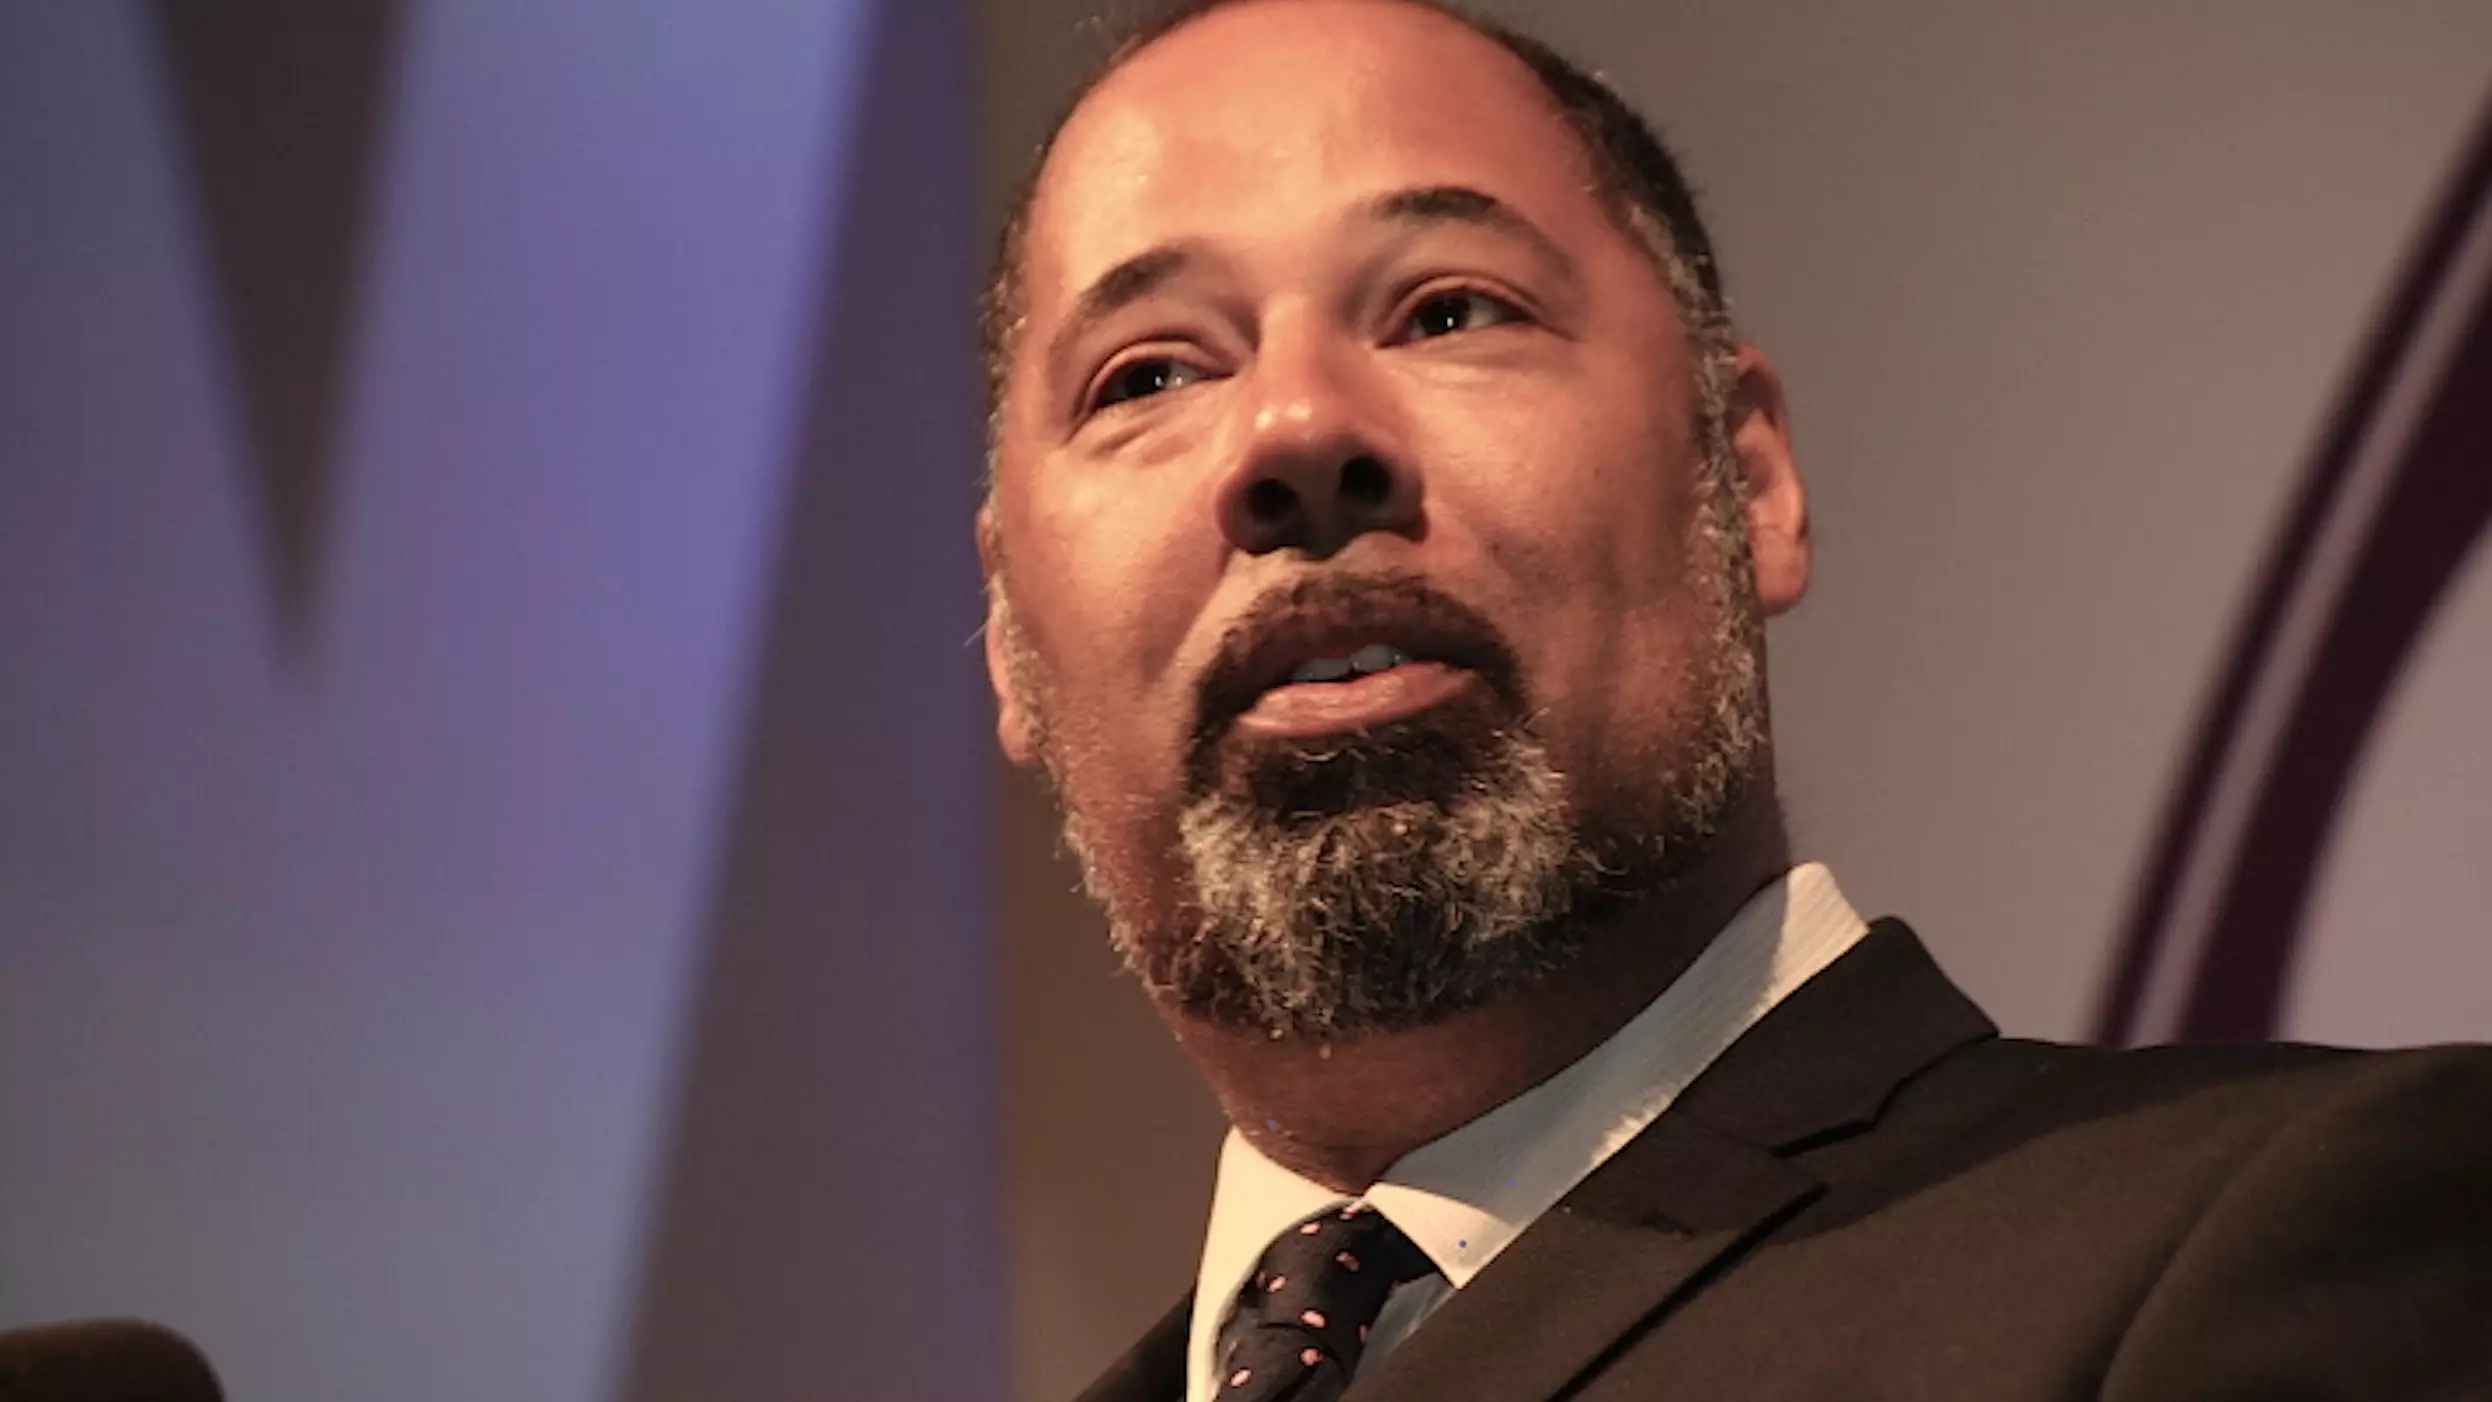 David Kurten Claims Masks Are Unnecessary As 'Lions Don't Wear' Them